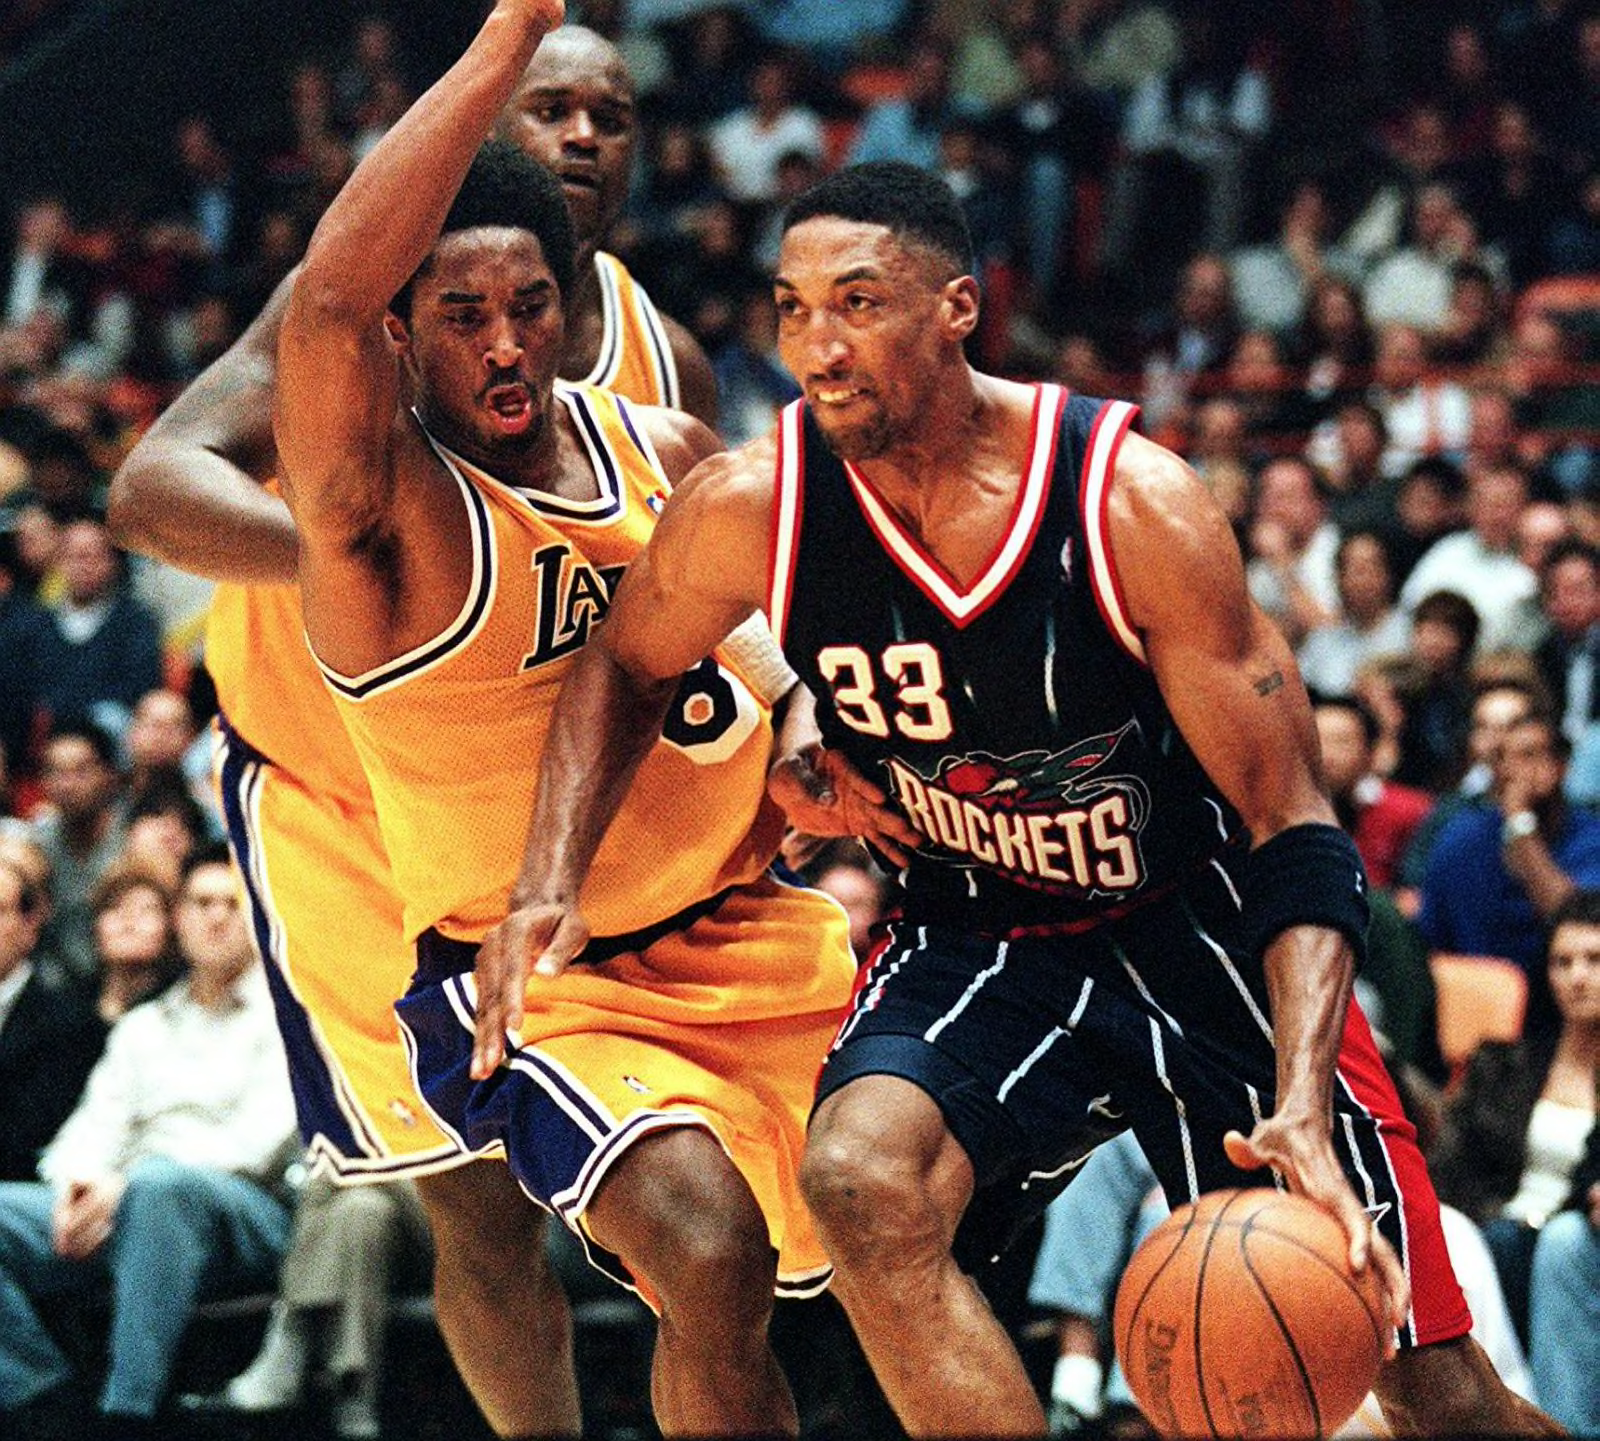 Did Scottie Pippen live up to the contract the Houston Rockets gave him?